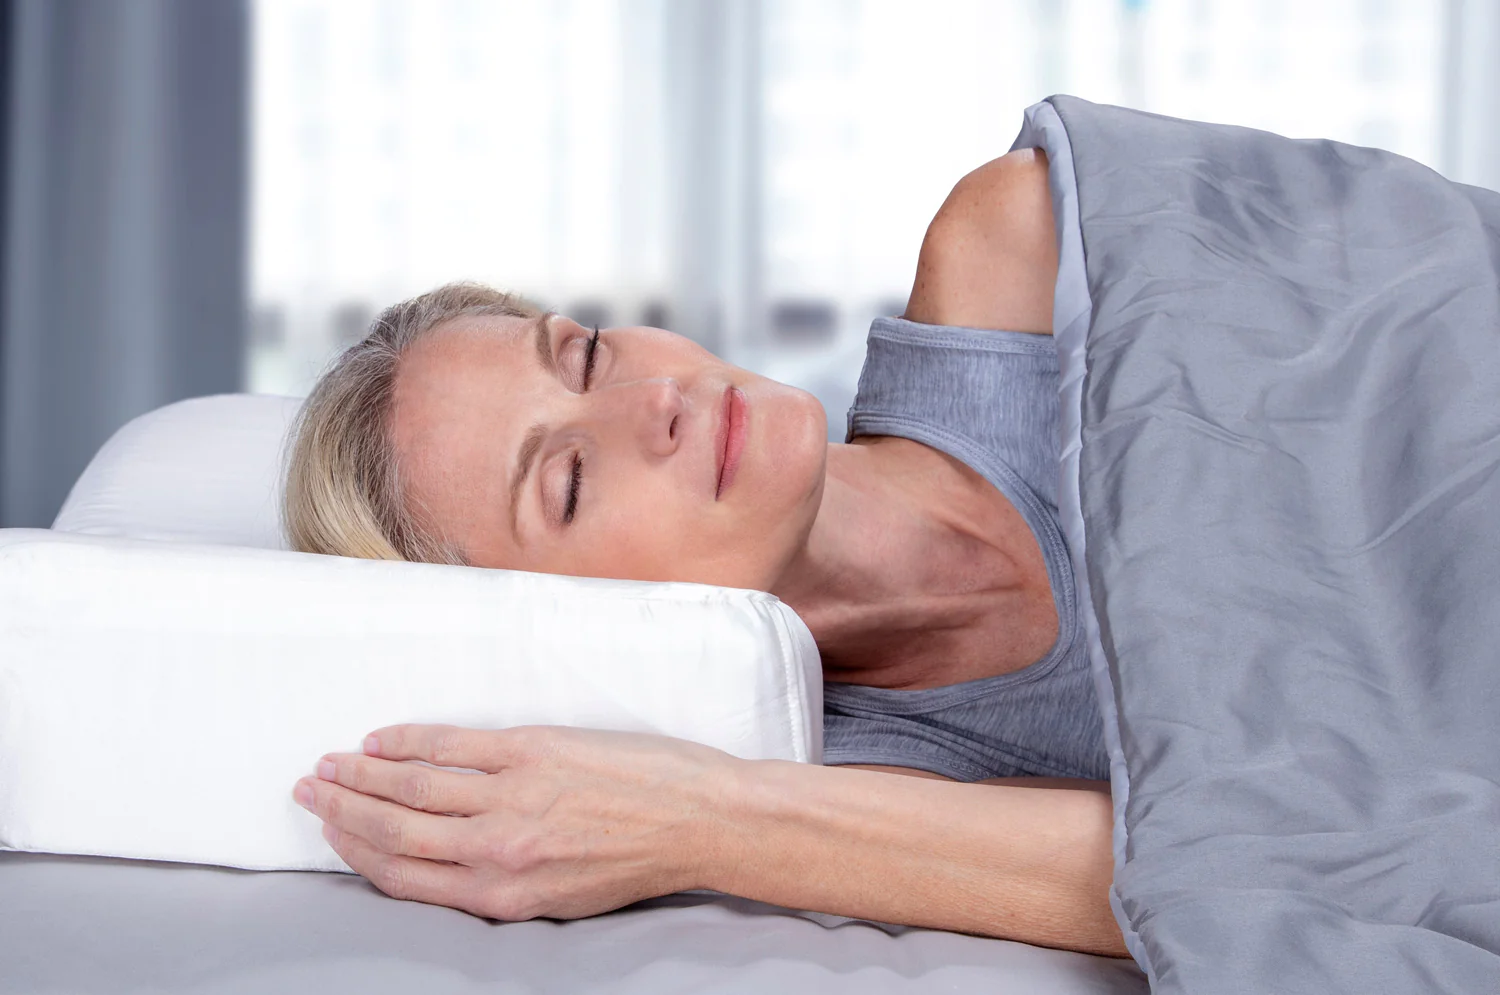 A pillow that reduces wrinkles and neck pain is on sale